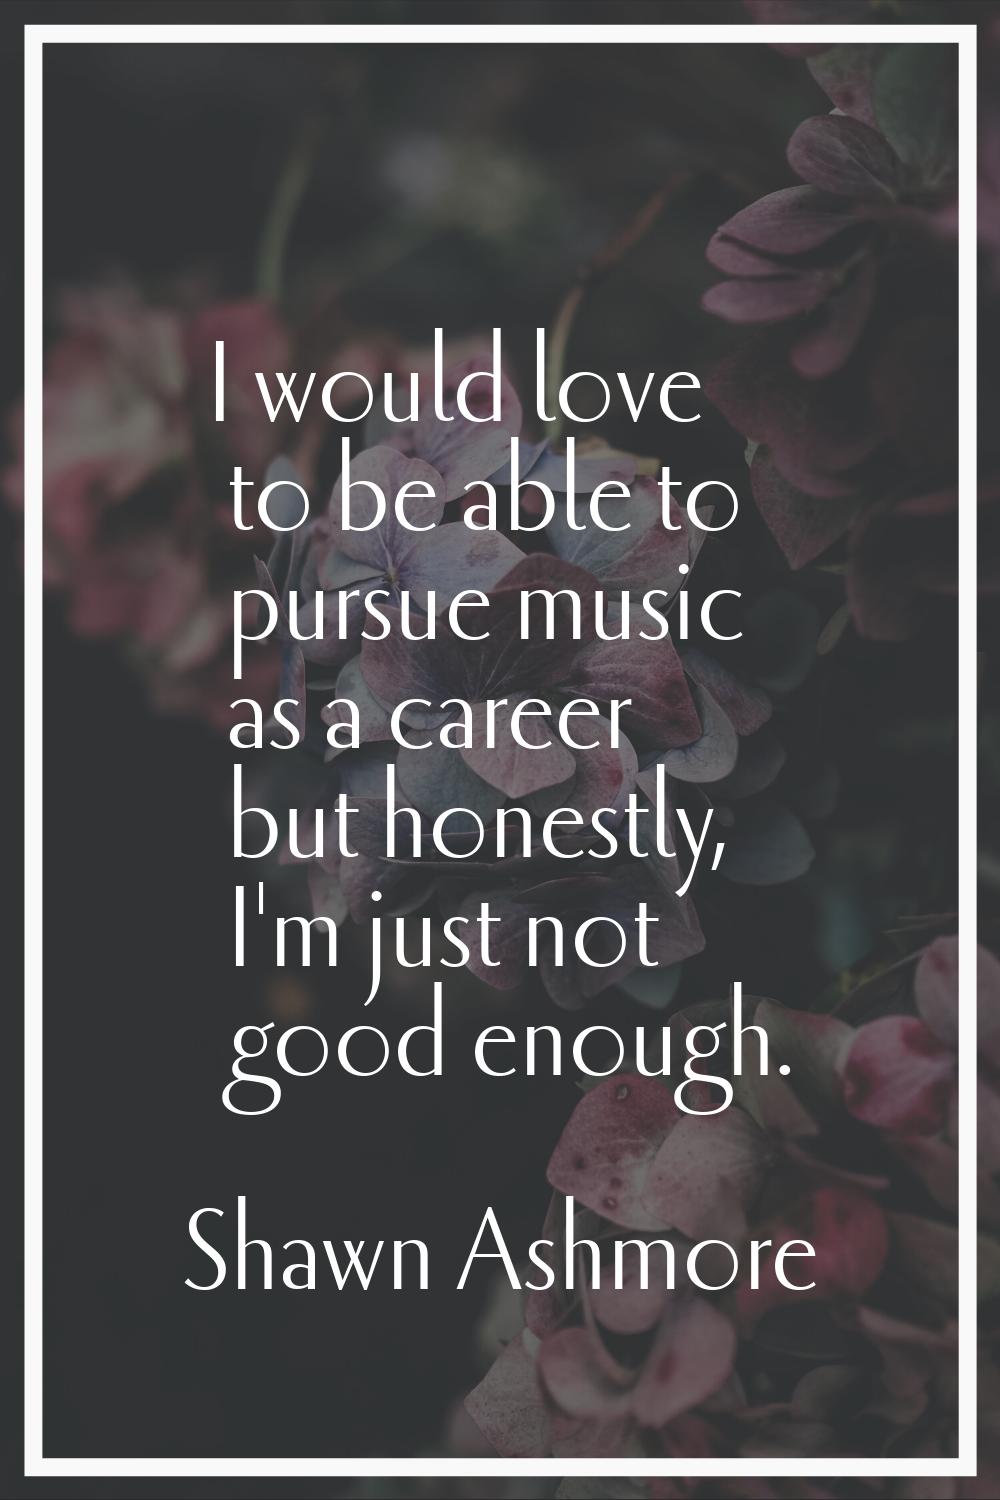 I would love to be able to pursue music as a career but honestly, I'm just not good enough.